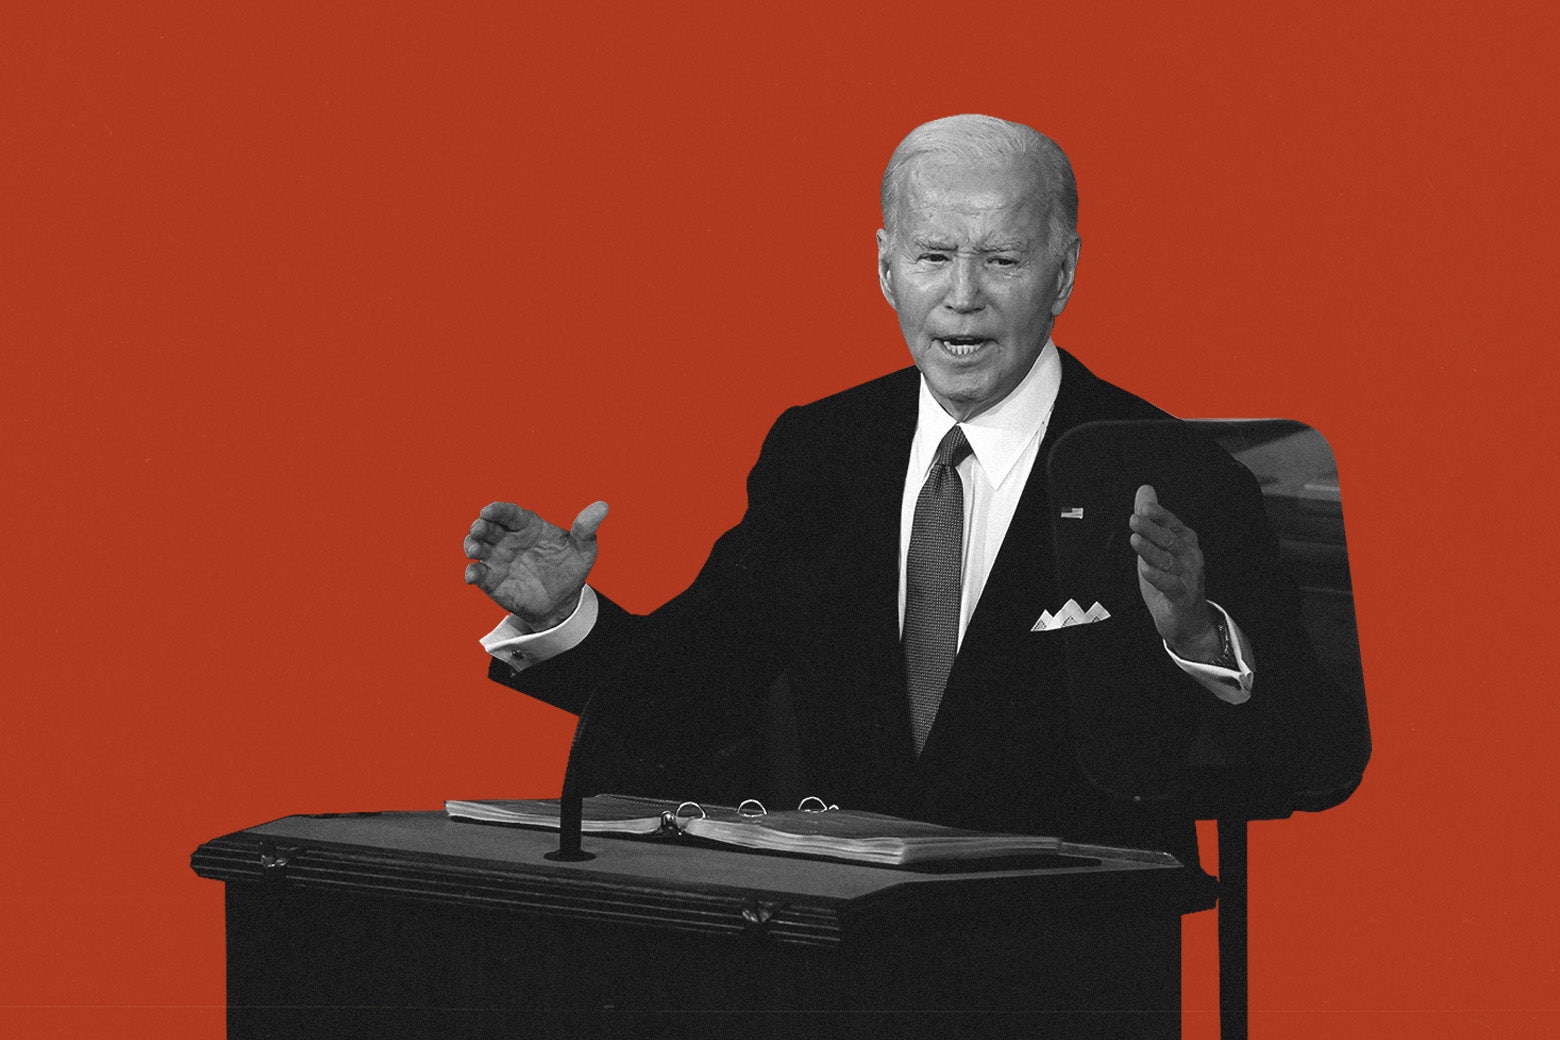 The Biggest Thing Missing from Joe Biden’s State of the Union David S. Cohen, Greer Donley, and Rachel Rebouche